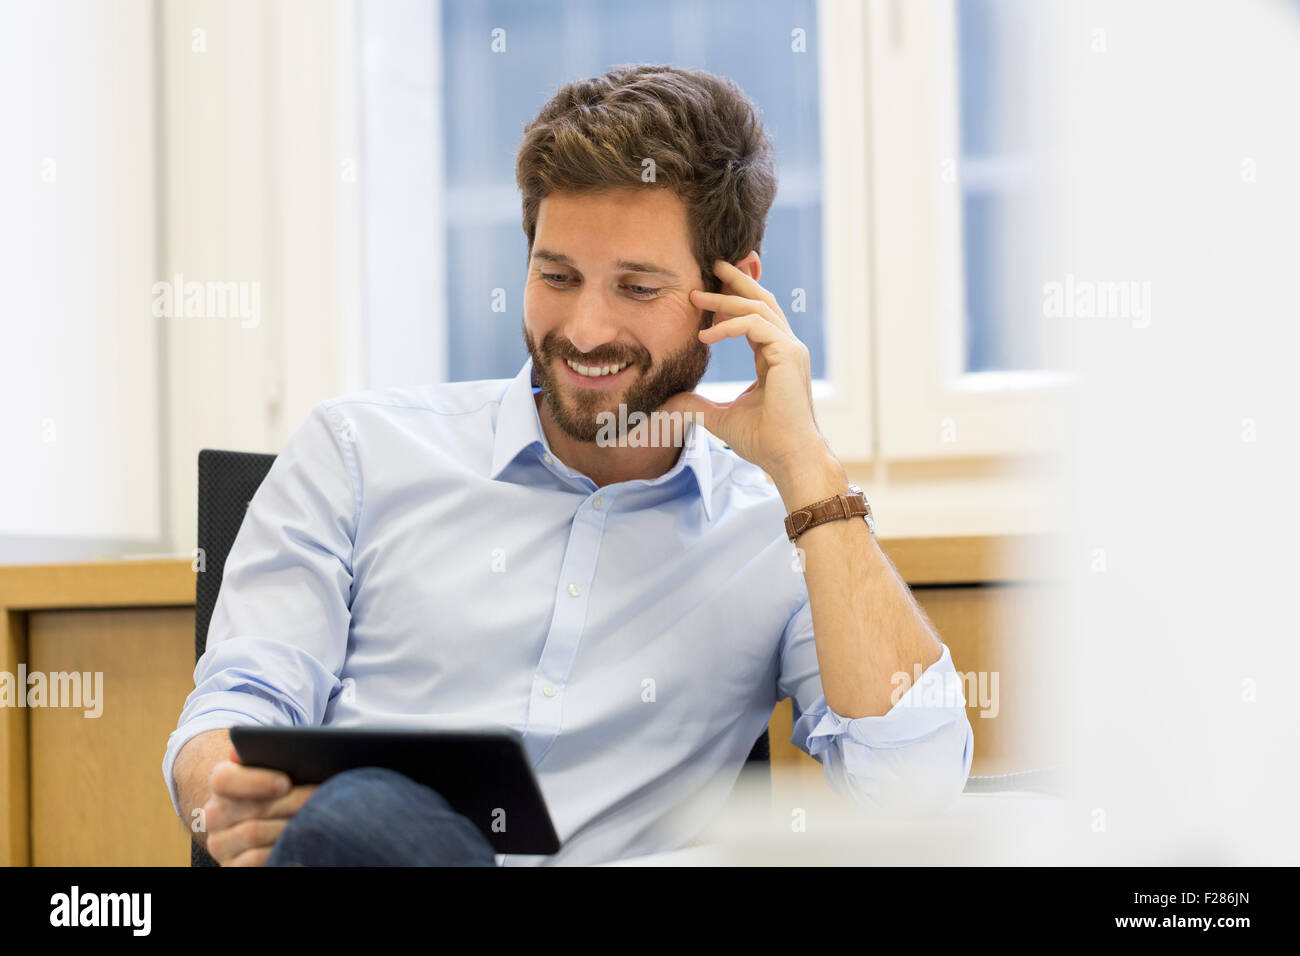 Cheering businessman in office using digital tablet Stock Photo